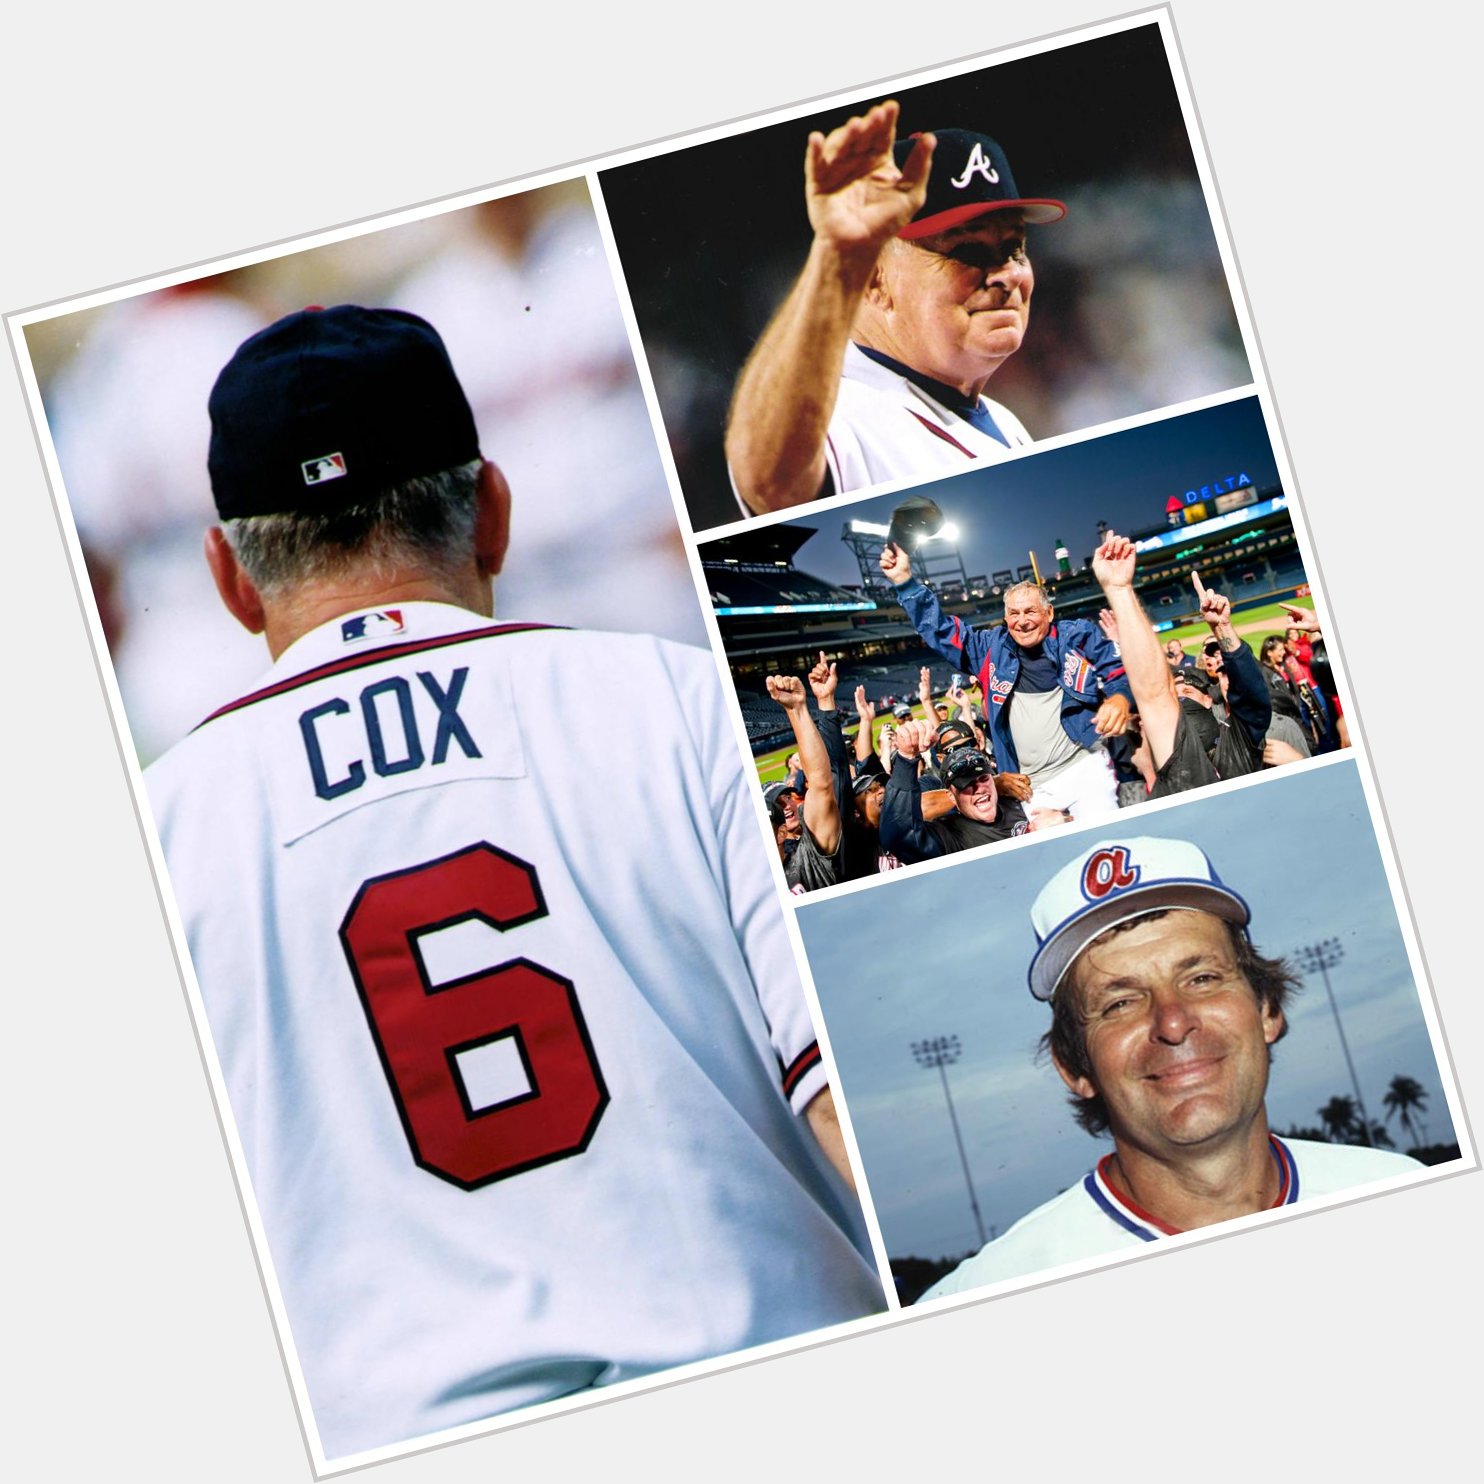 Happy Birthday to a very special Hall of Famer, the one and only Bobby Cox! 